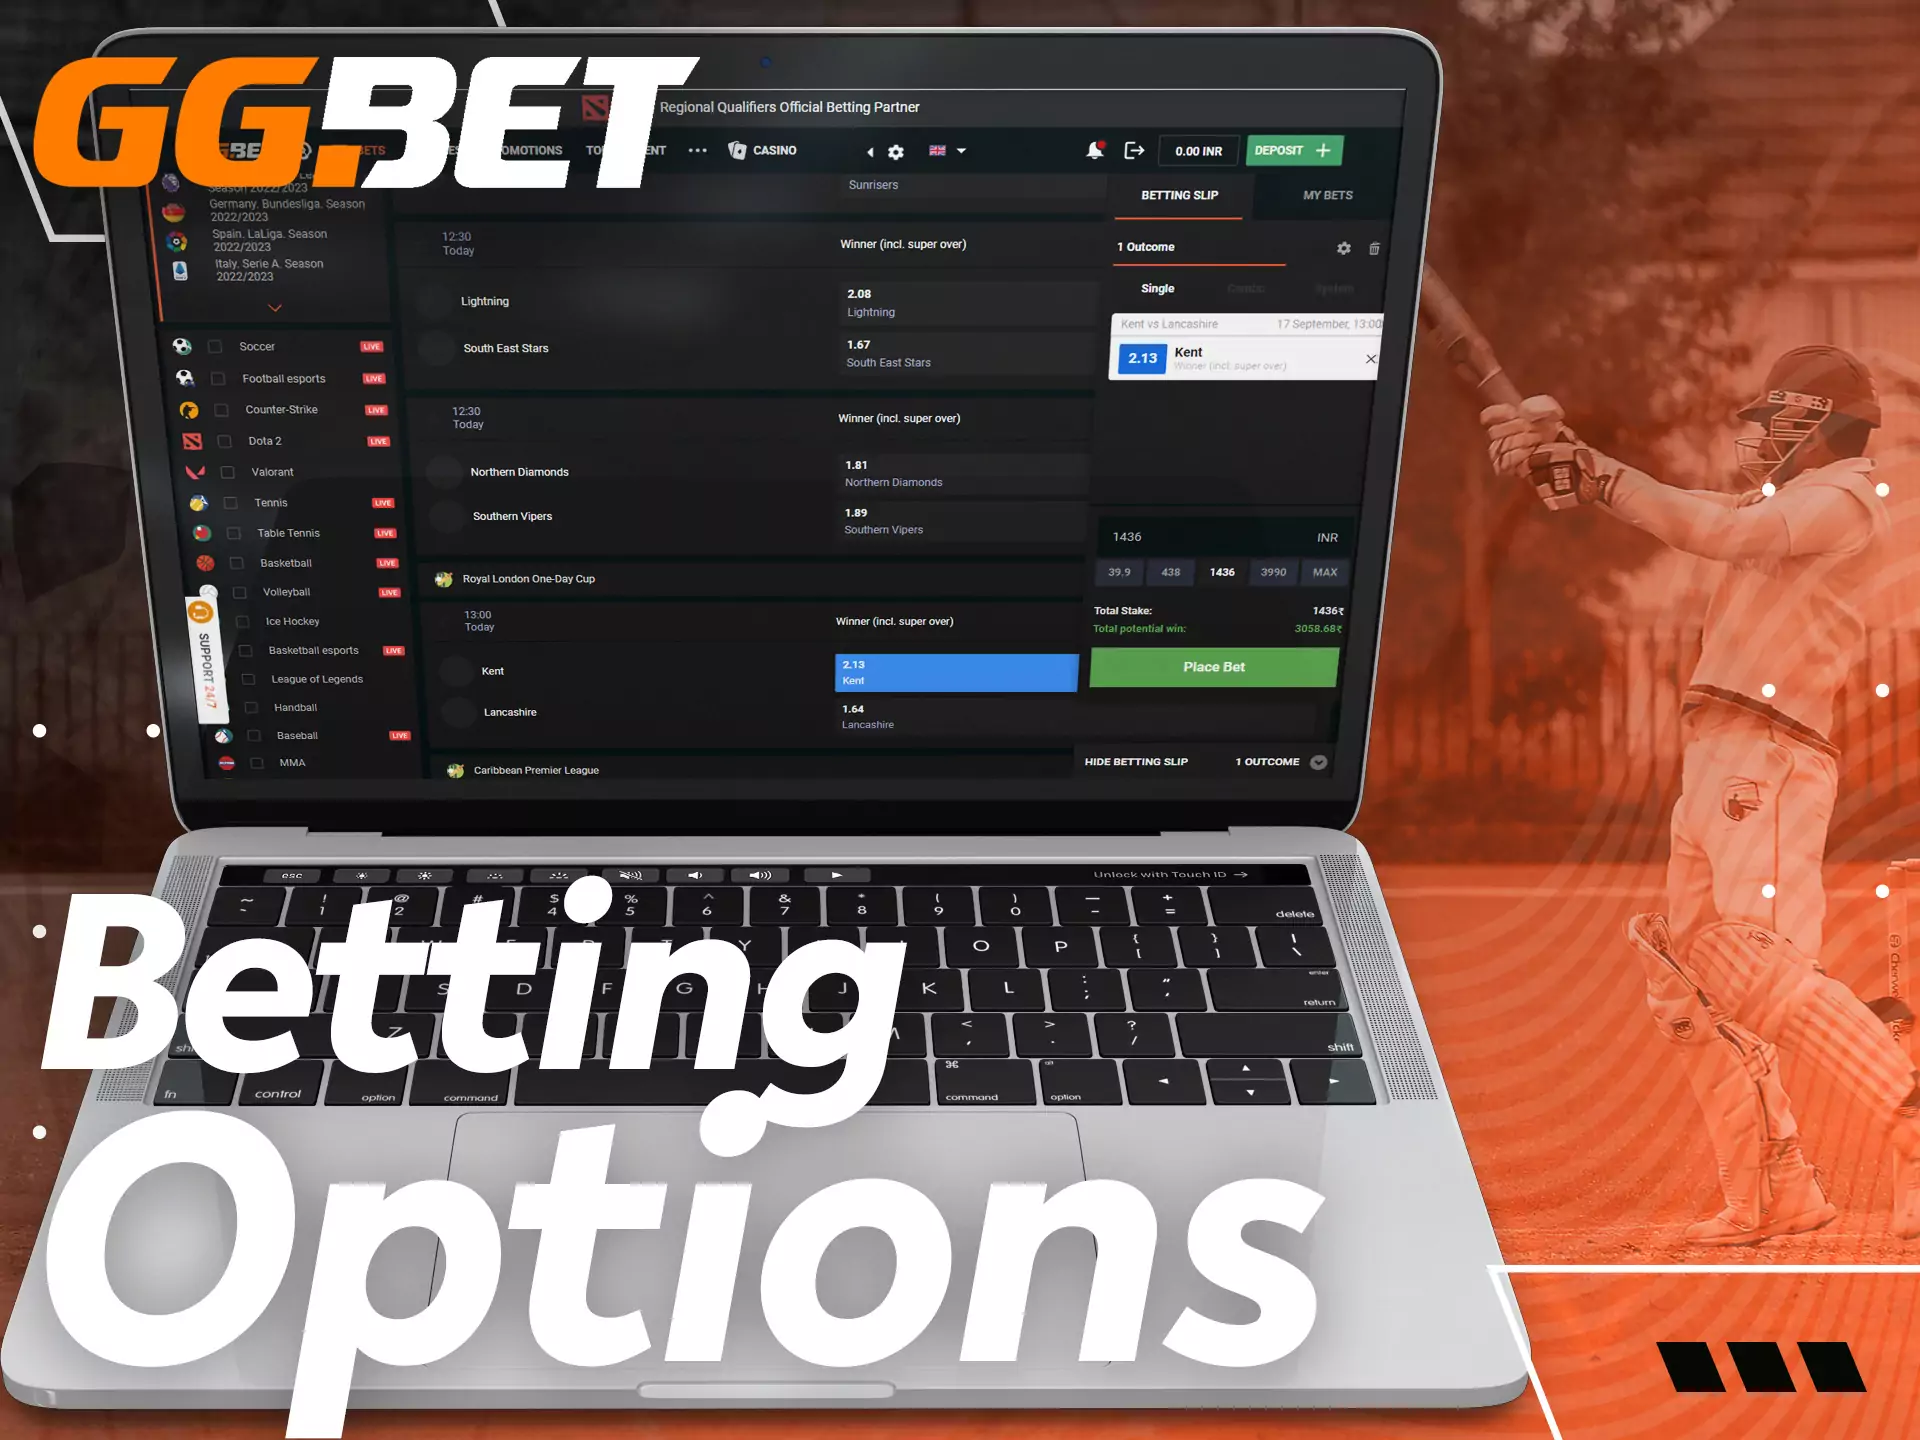 On GGBet, users bet on line and on live sports matches.